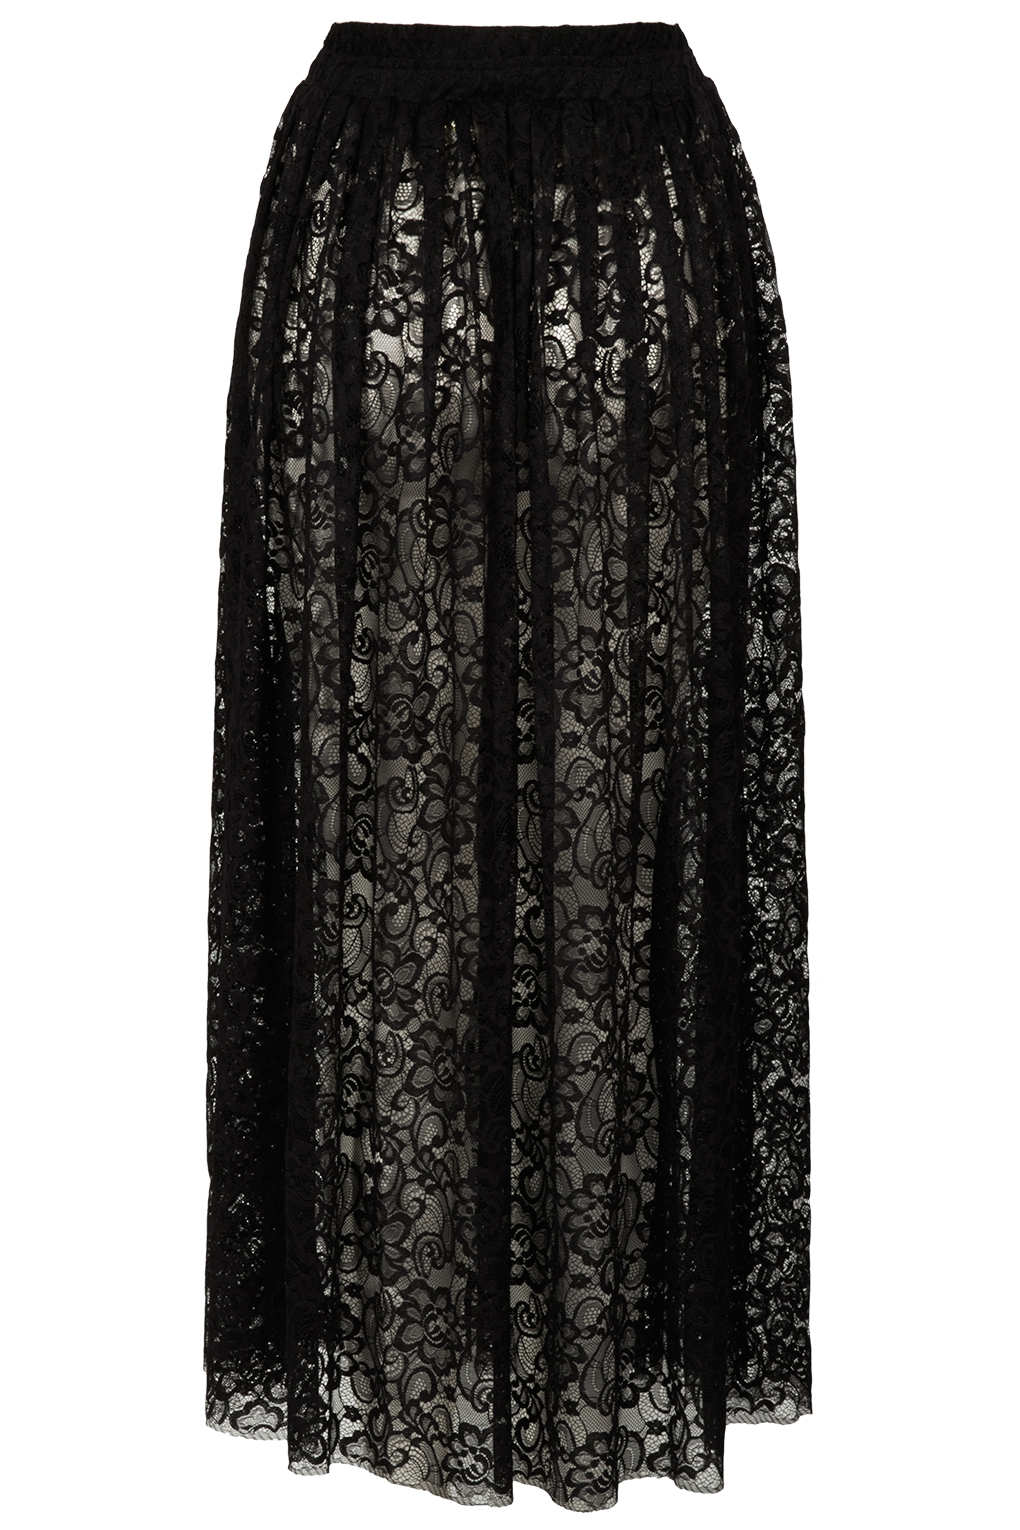 Lyst - Topshop Dark Romance Lace Maxi Skirt By Goldie in Black